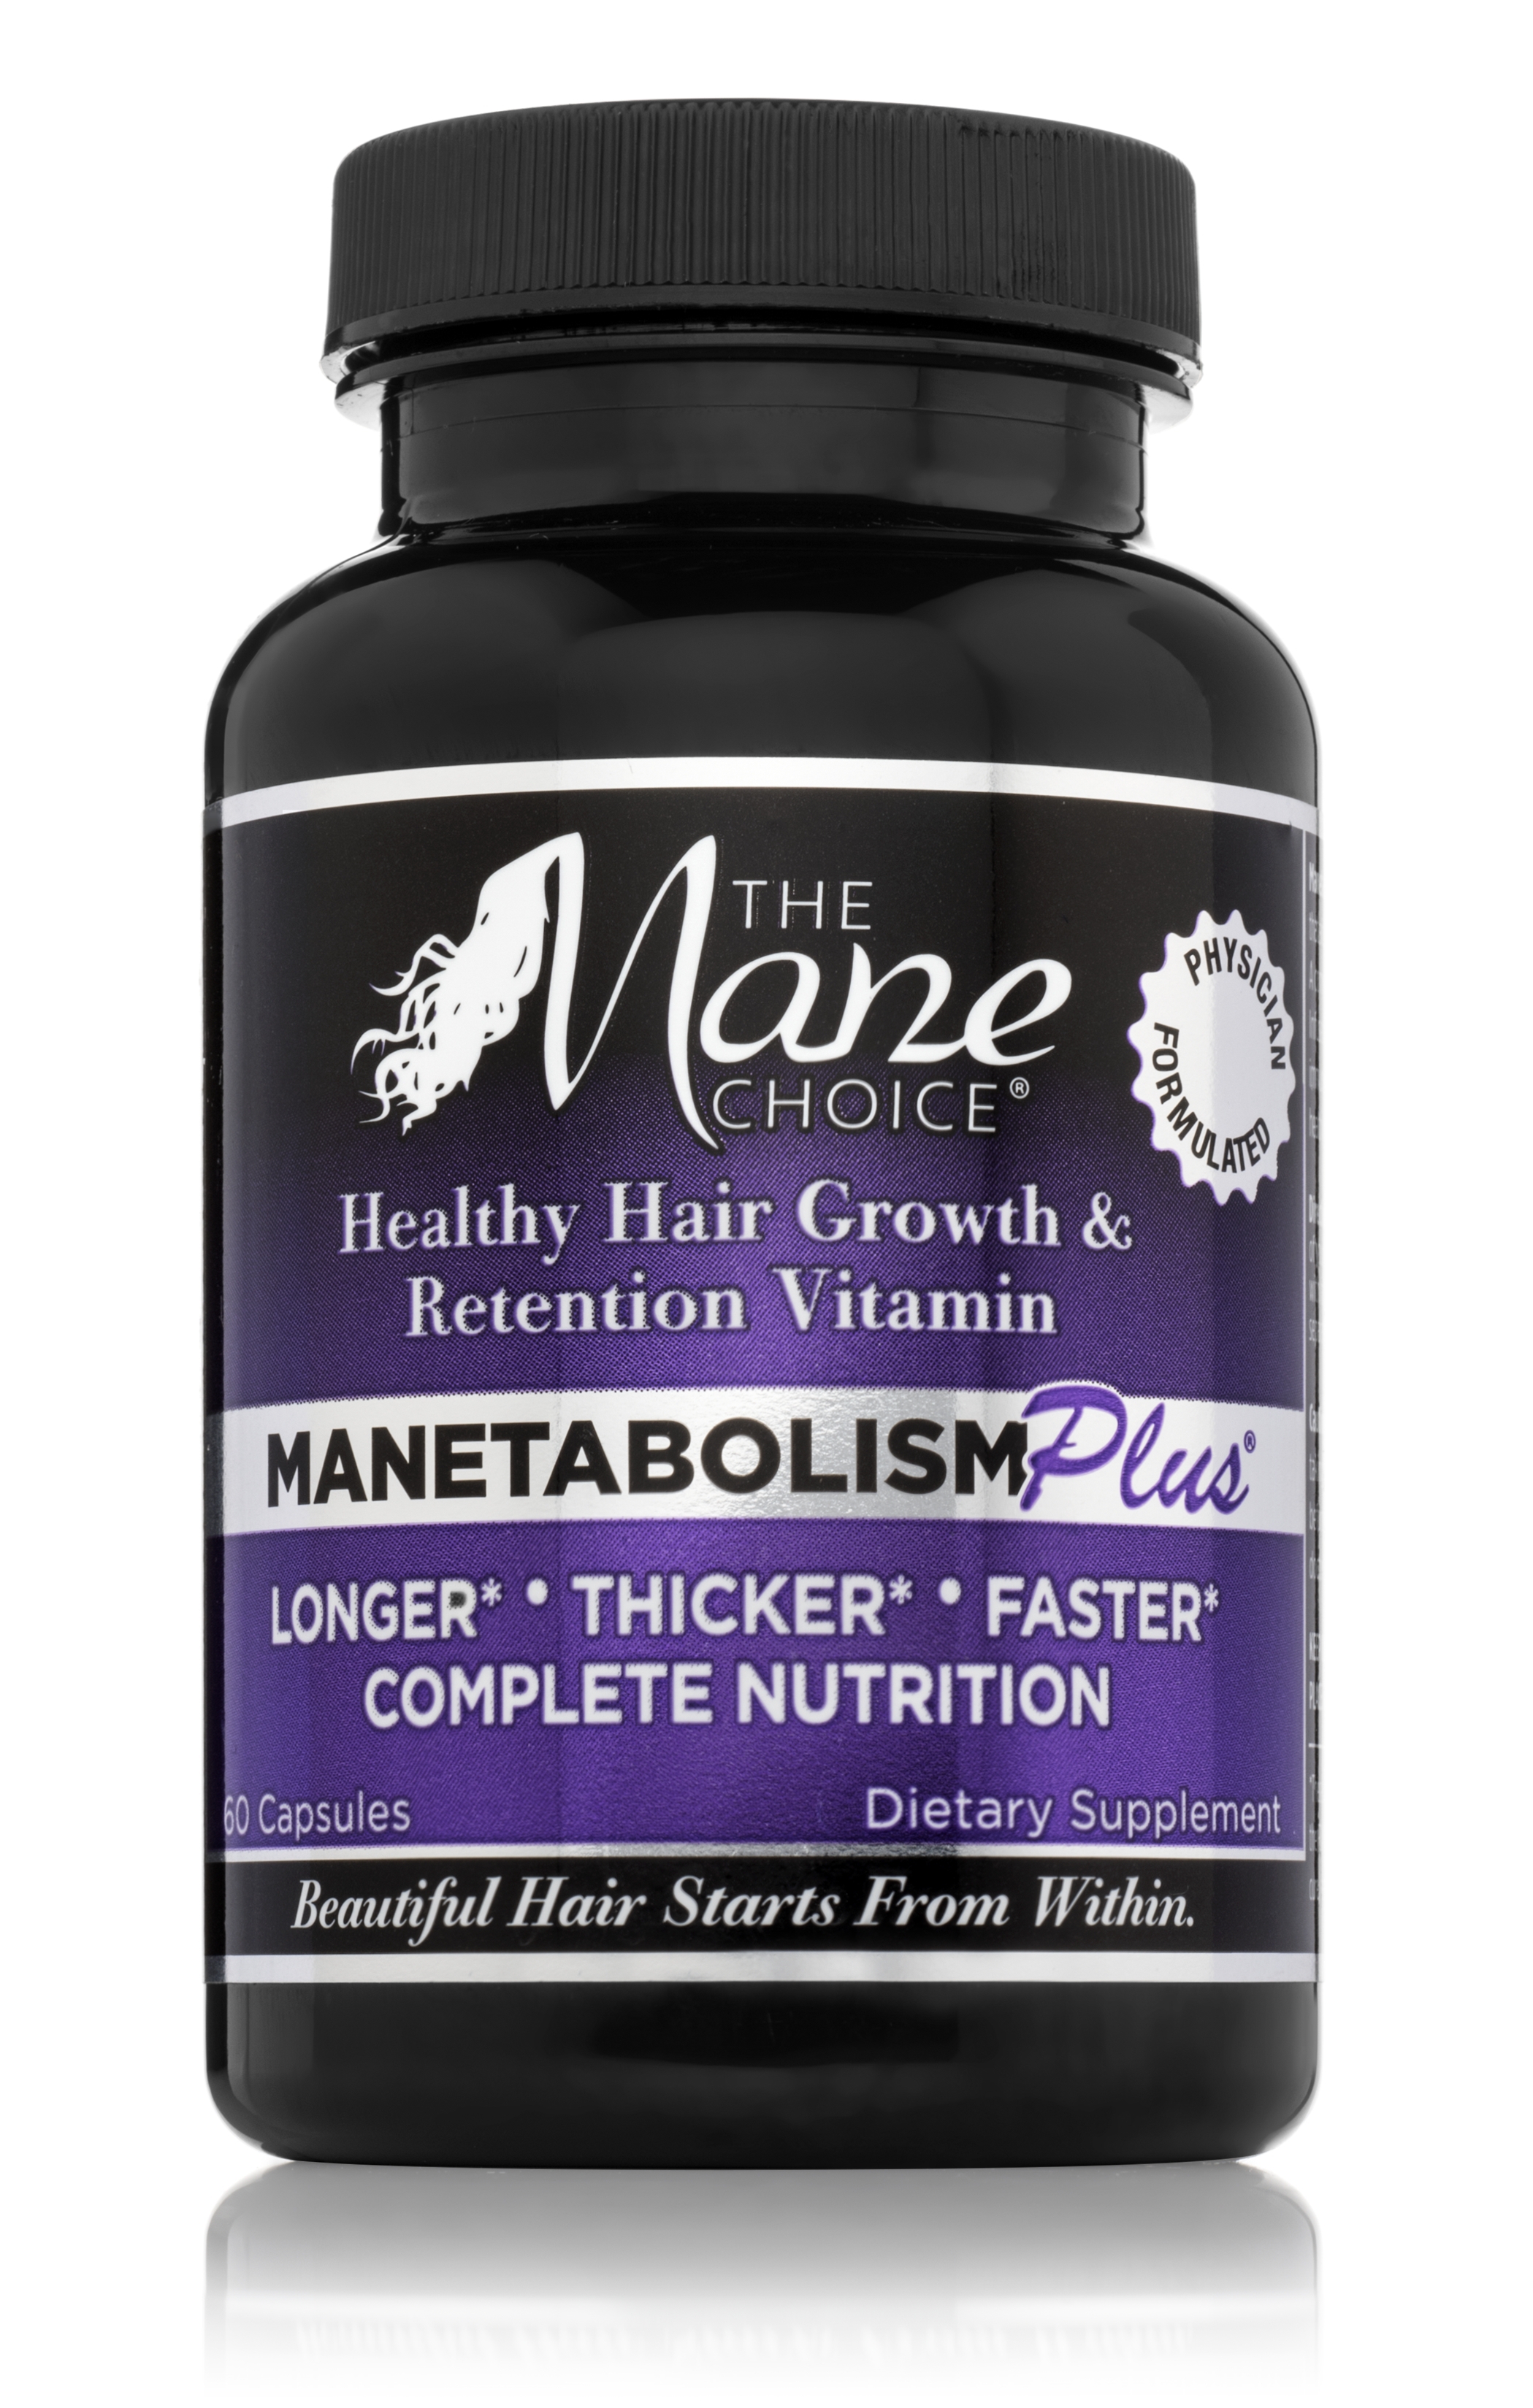 #1 rated multi-vitamin promoting longer, healthier hair by Mane Choice Hair Solution